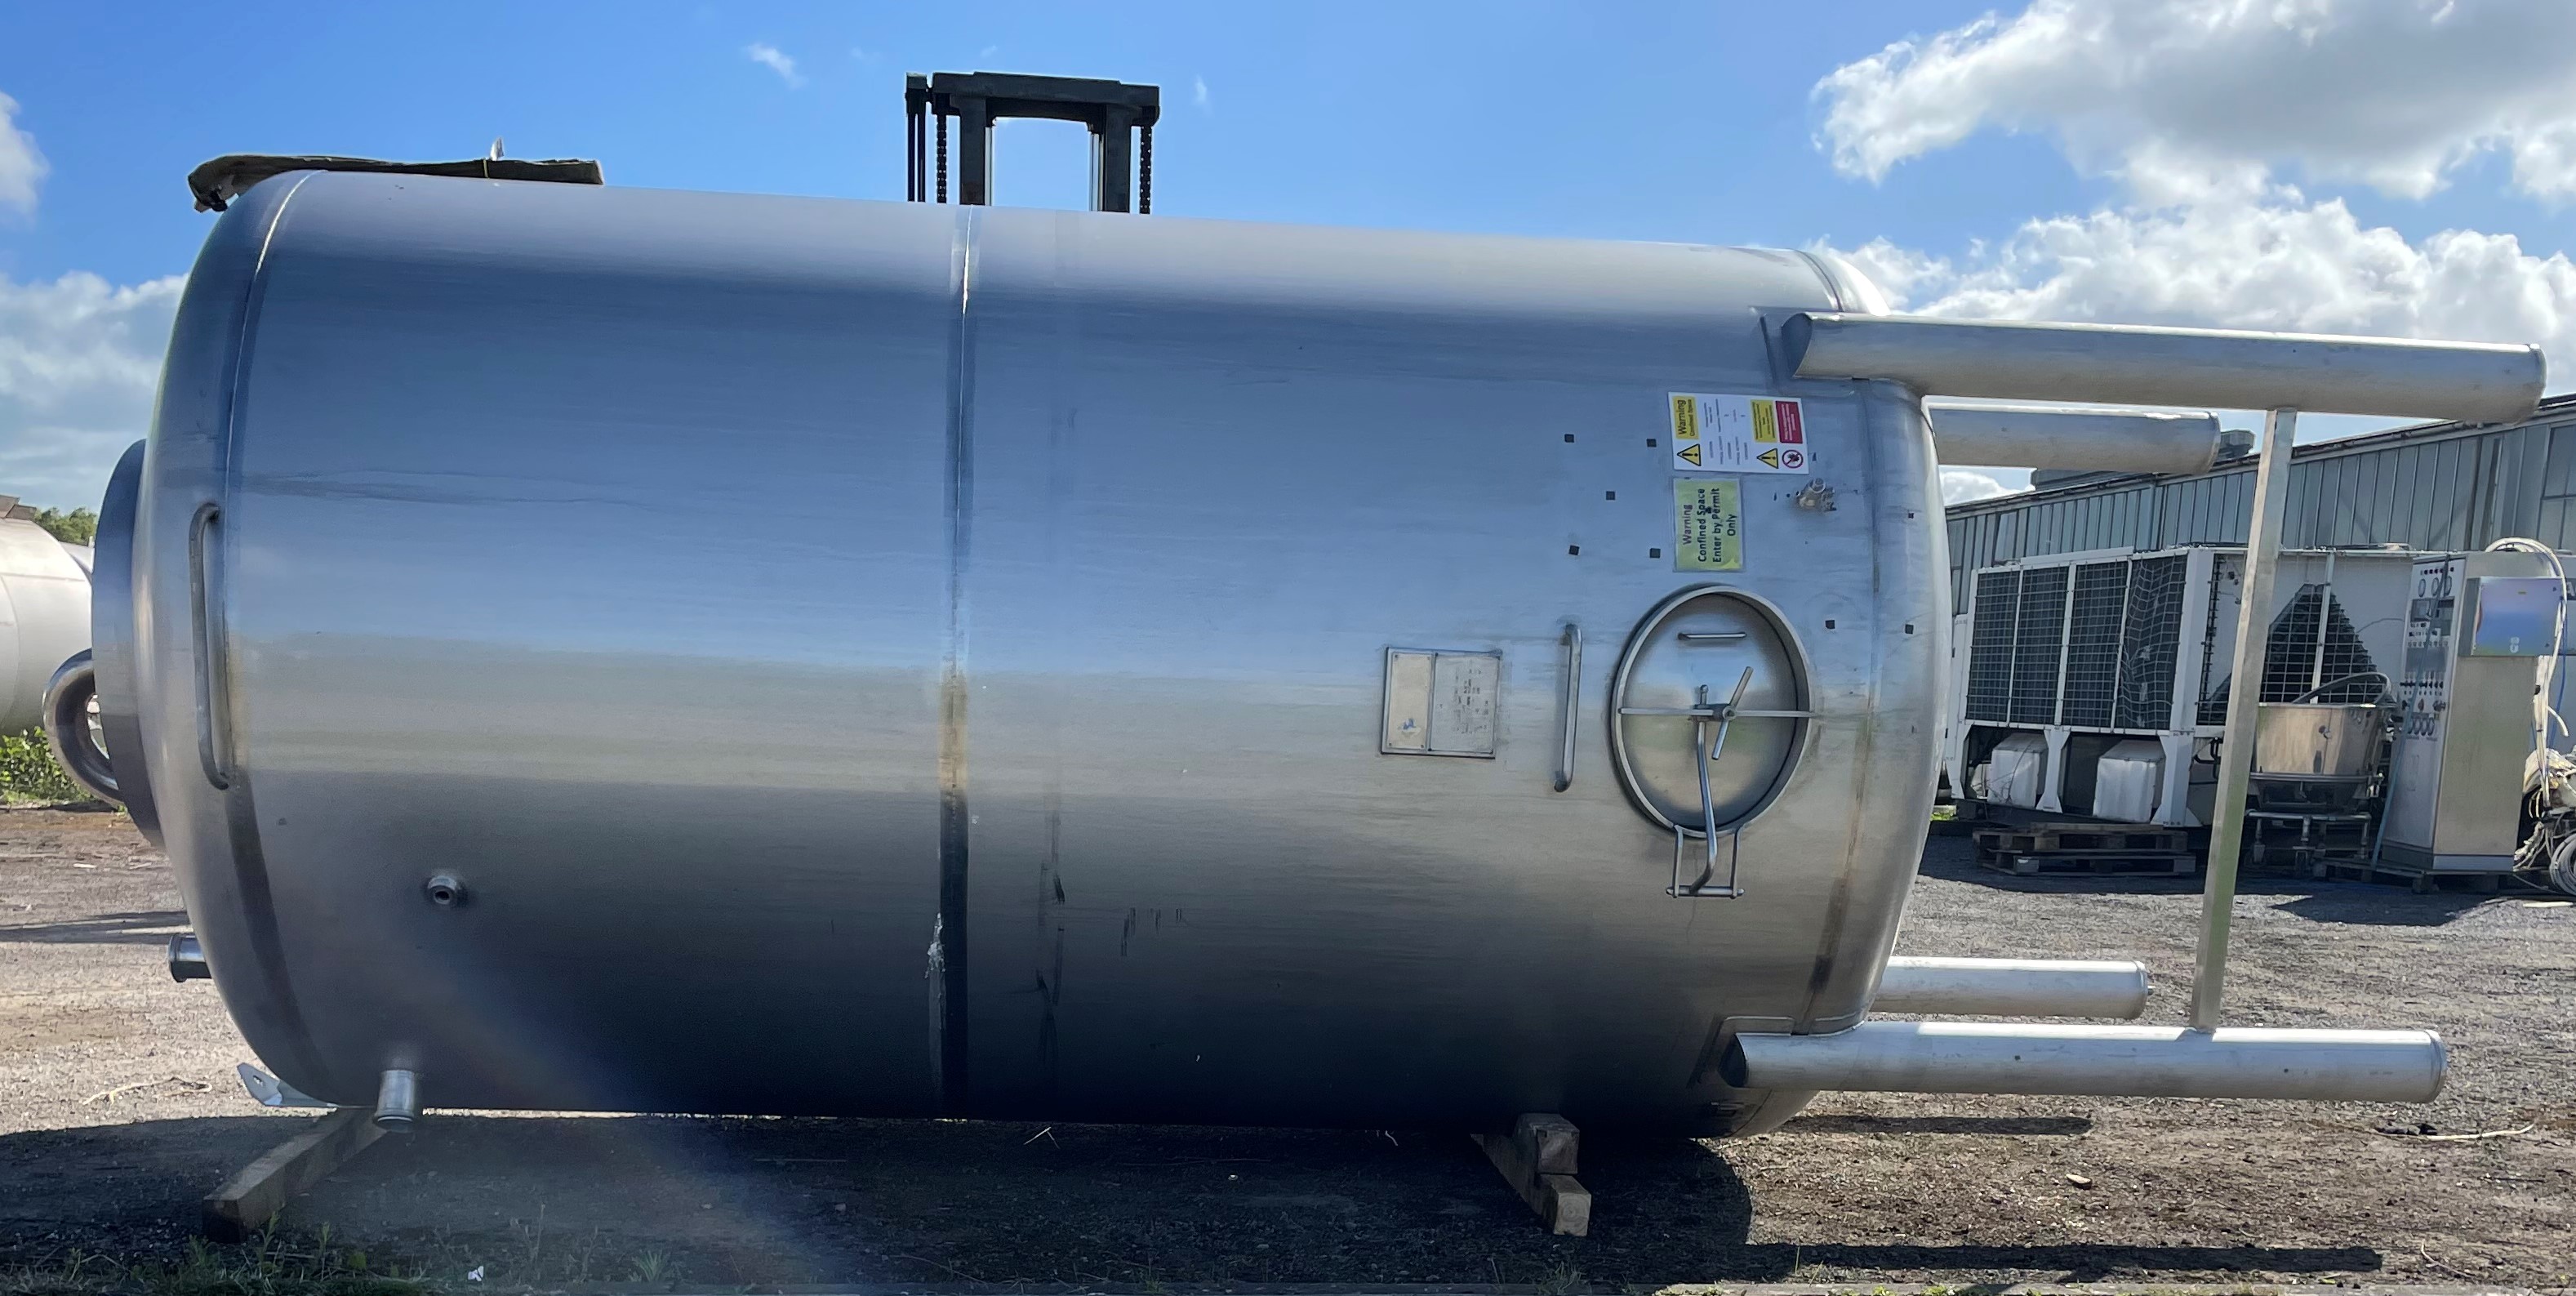 15,000 Litre Stainless Steel Vertical Storage Vessel 2200mm Dia x 3500mm Straight Side